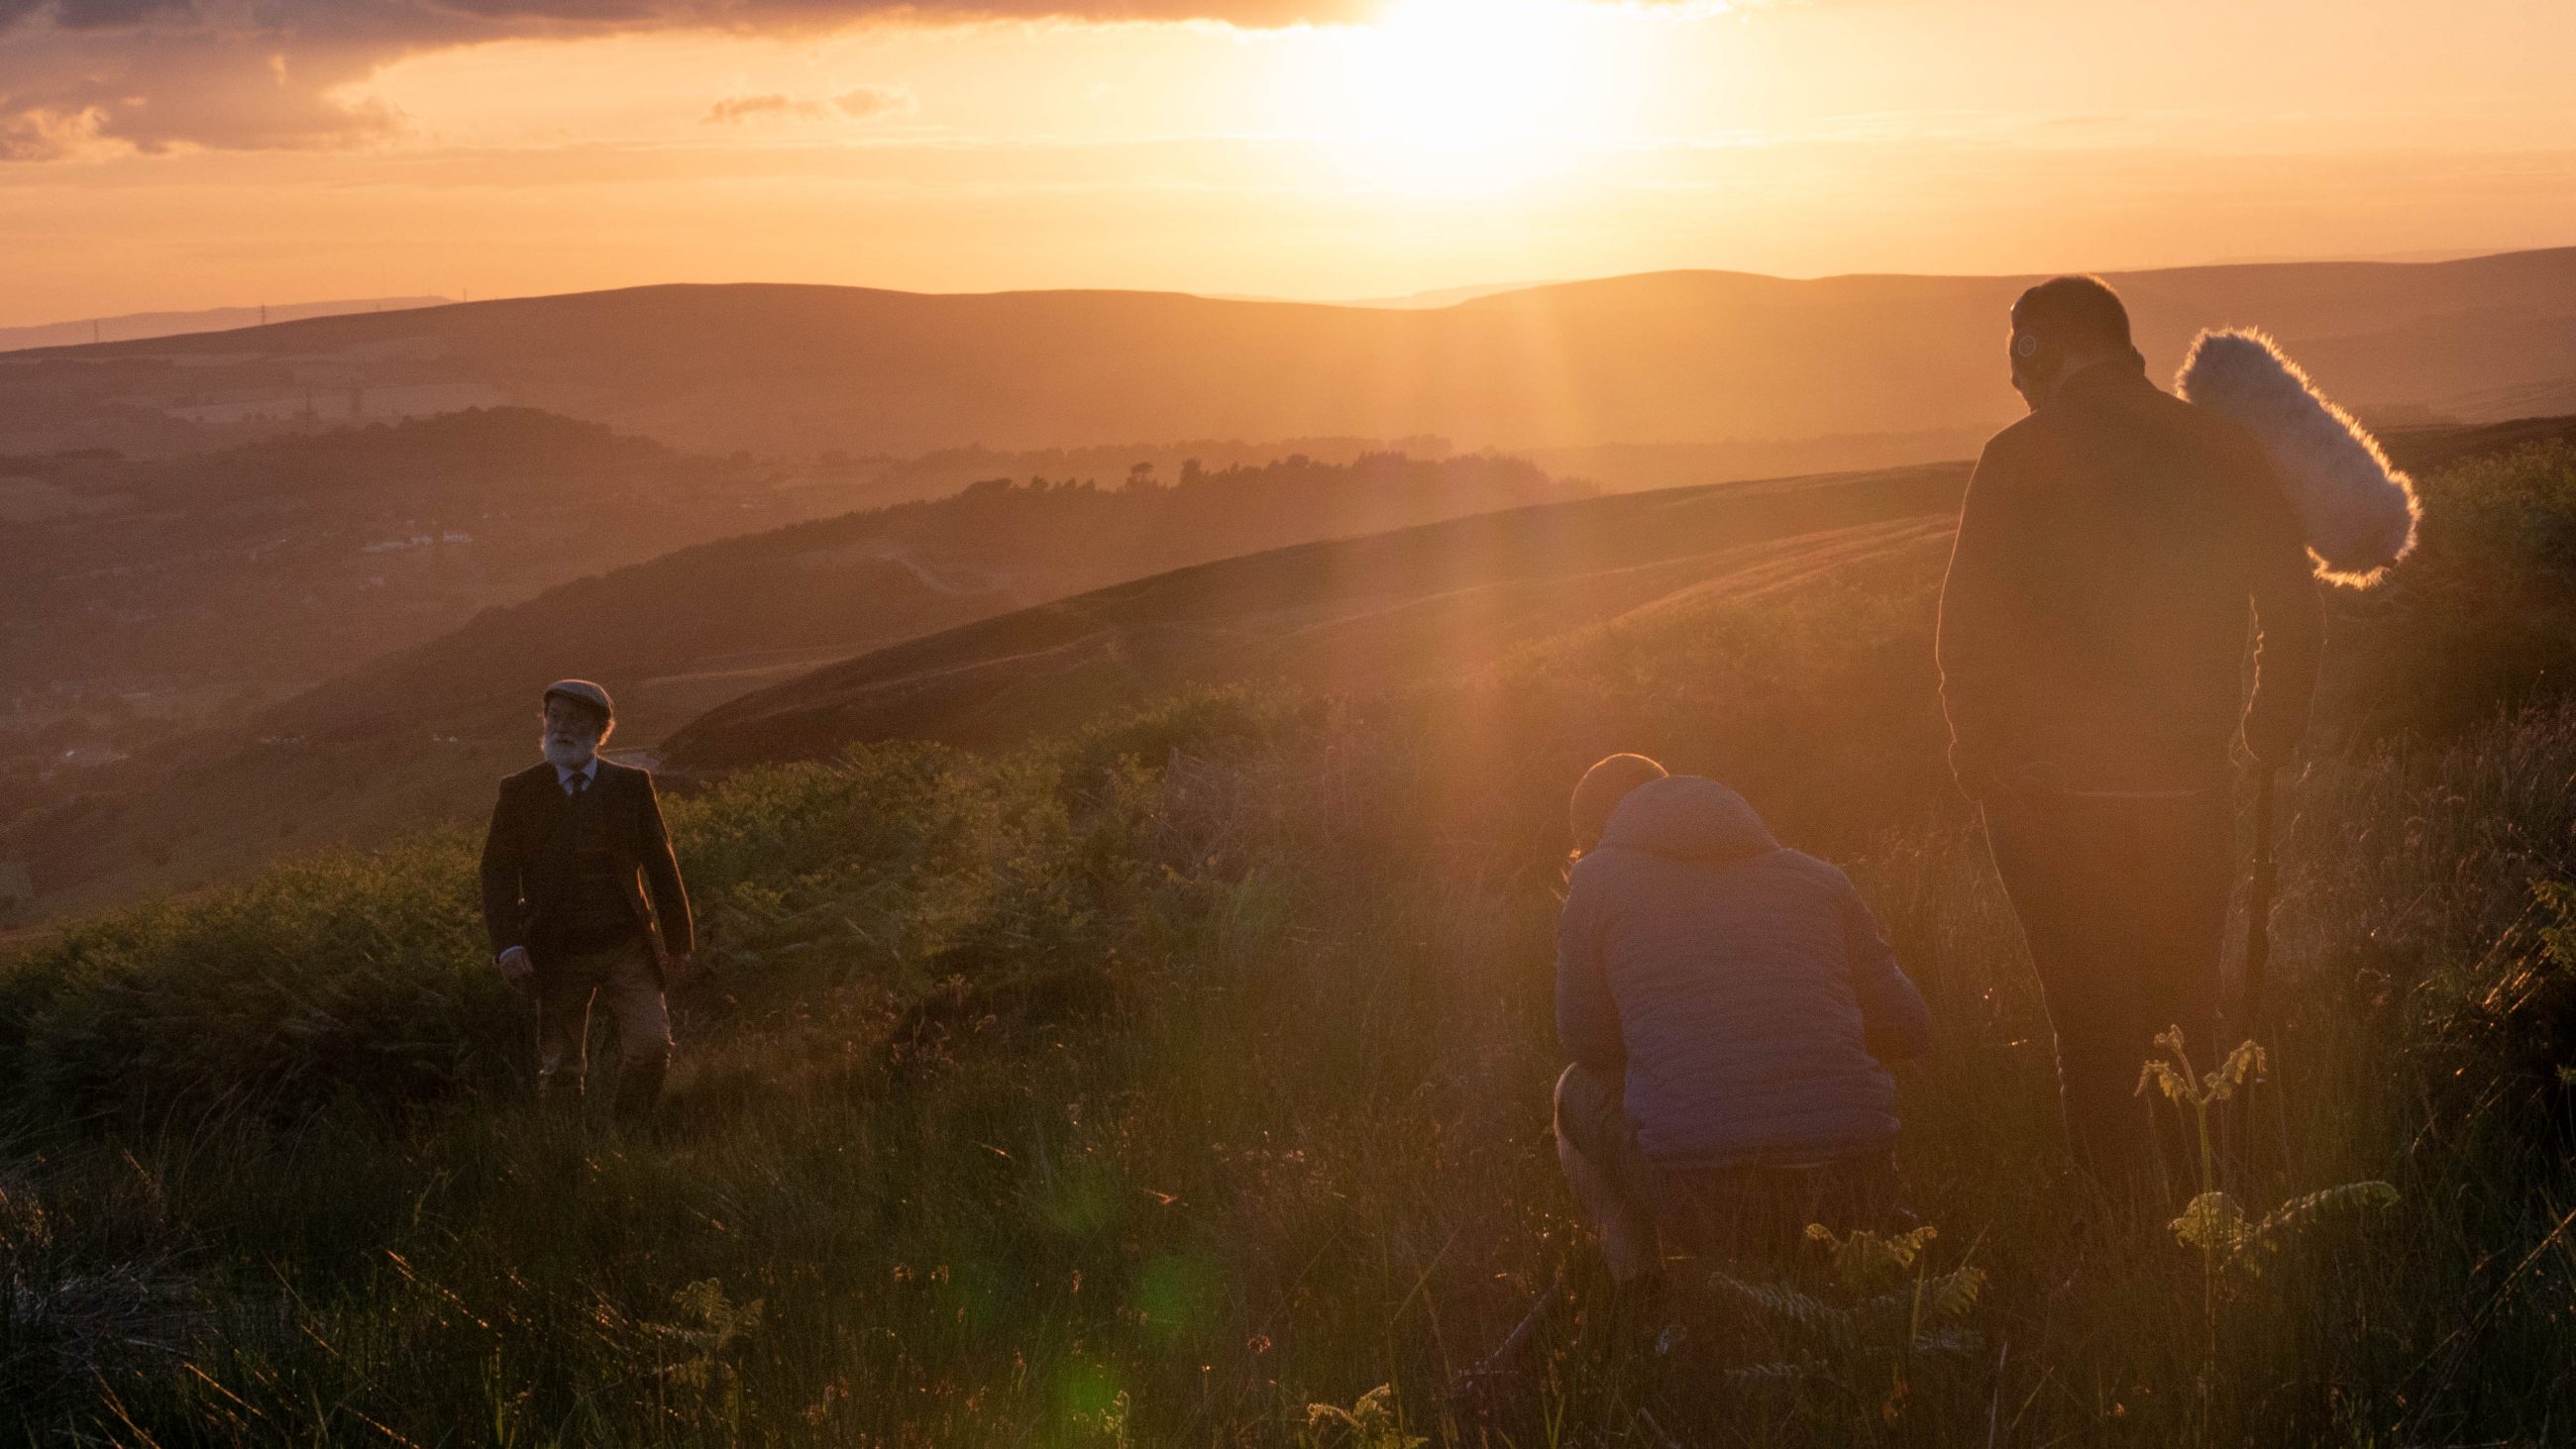 Behind the scenes, filming the final sequence of The Carbon Farmer at sunset